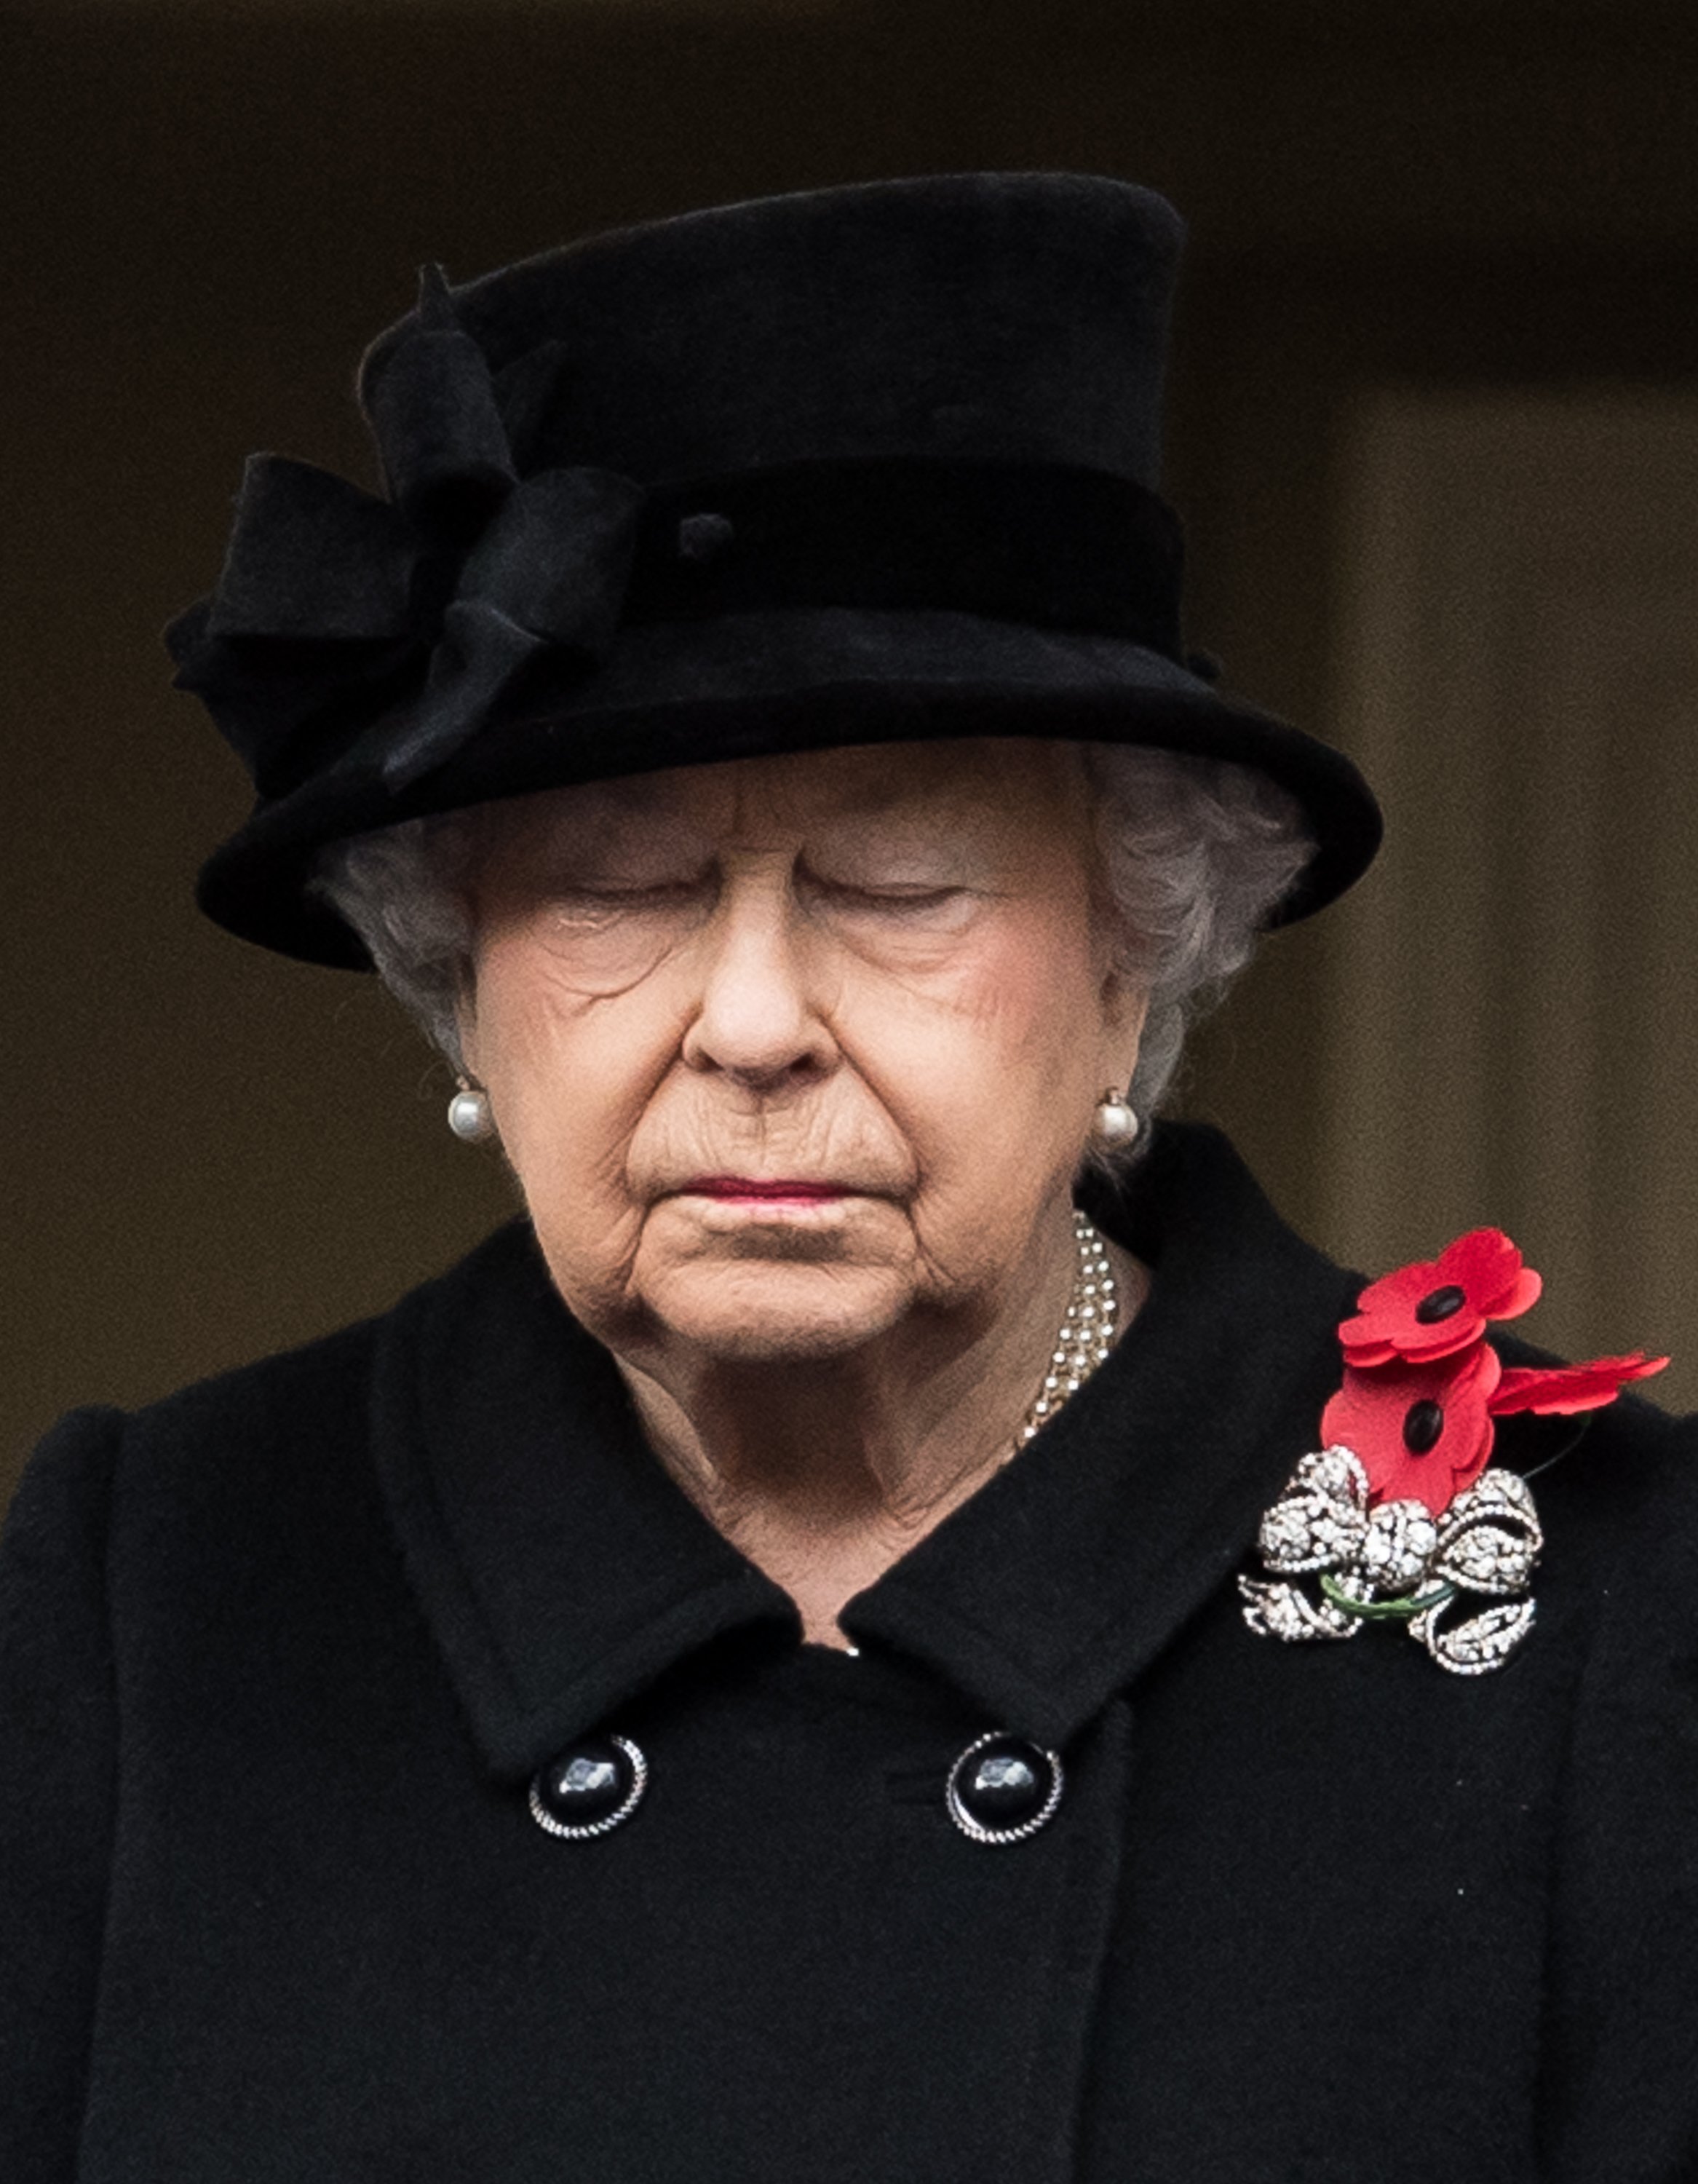 Queen Elizabeth II during the annual Remembrance Sunday Service at The Cenotaph on November 12, 2017 in London, England. | Source: Getty Images